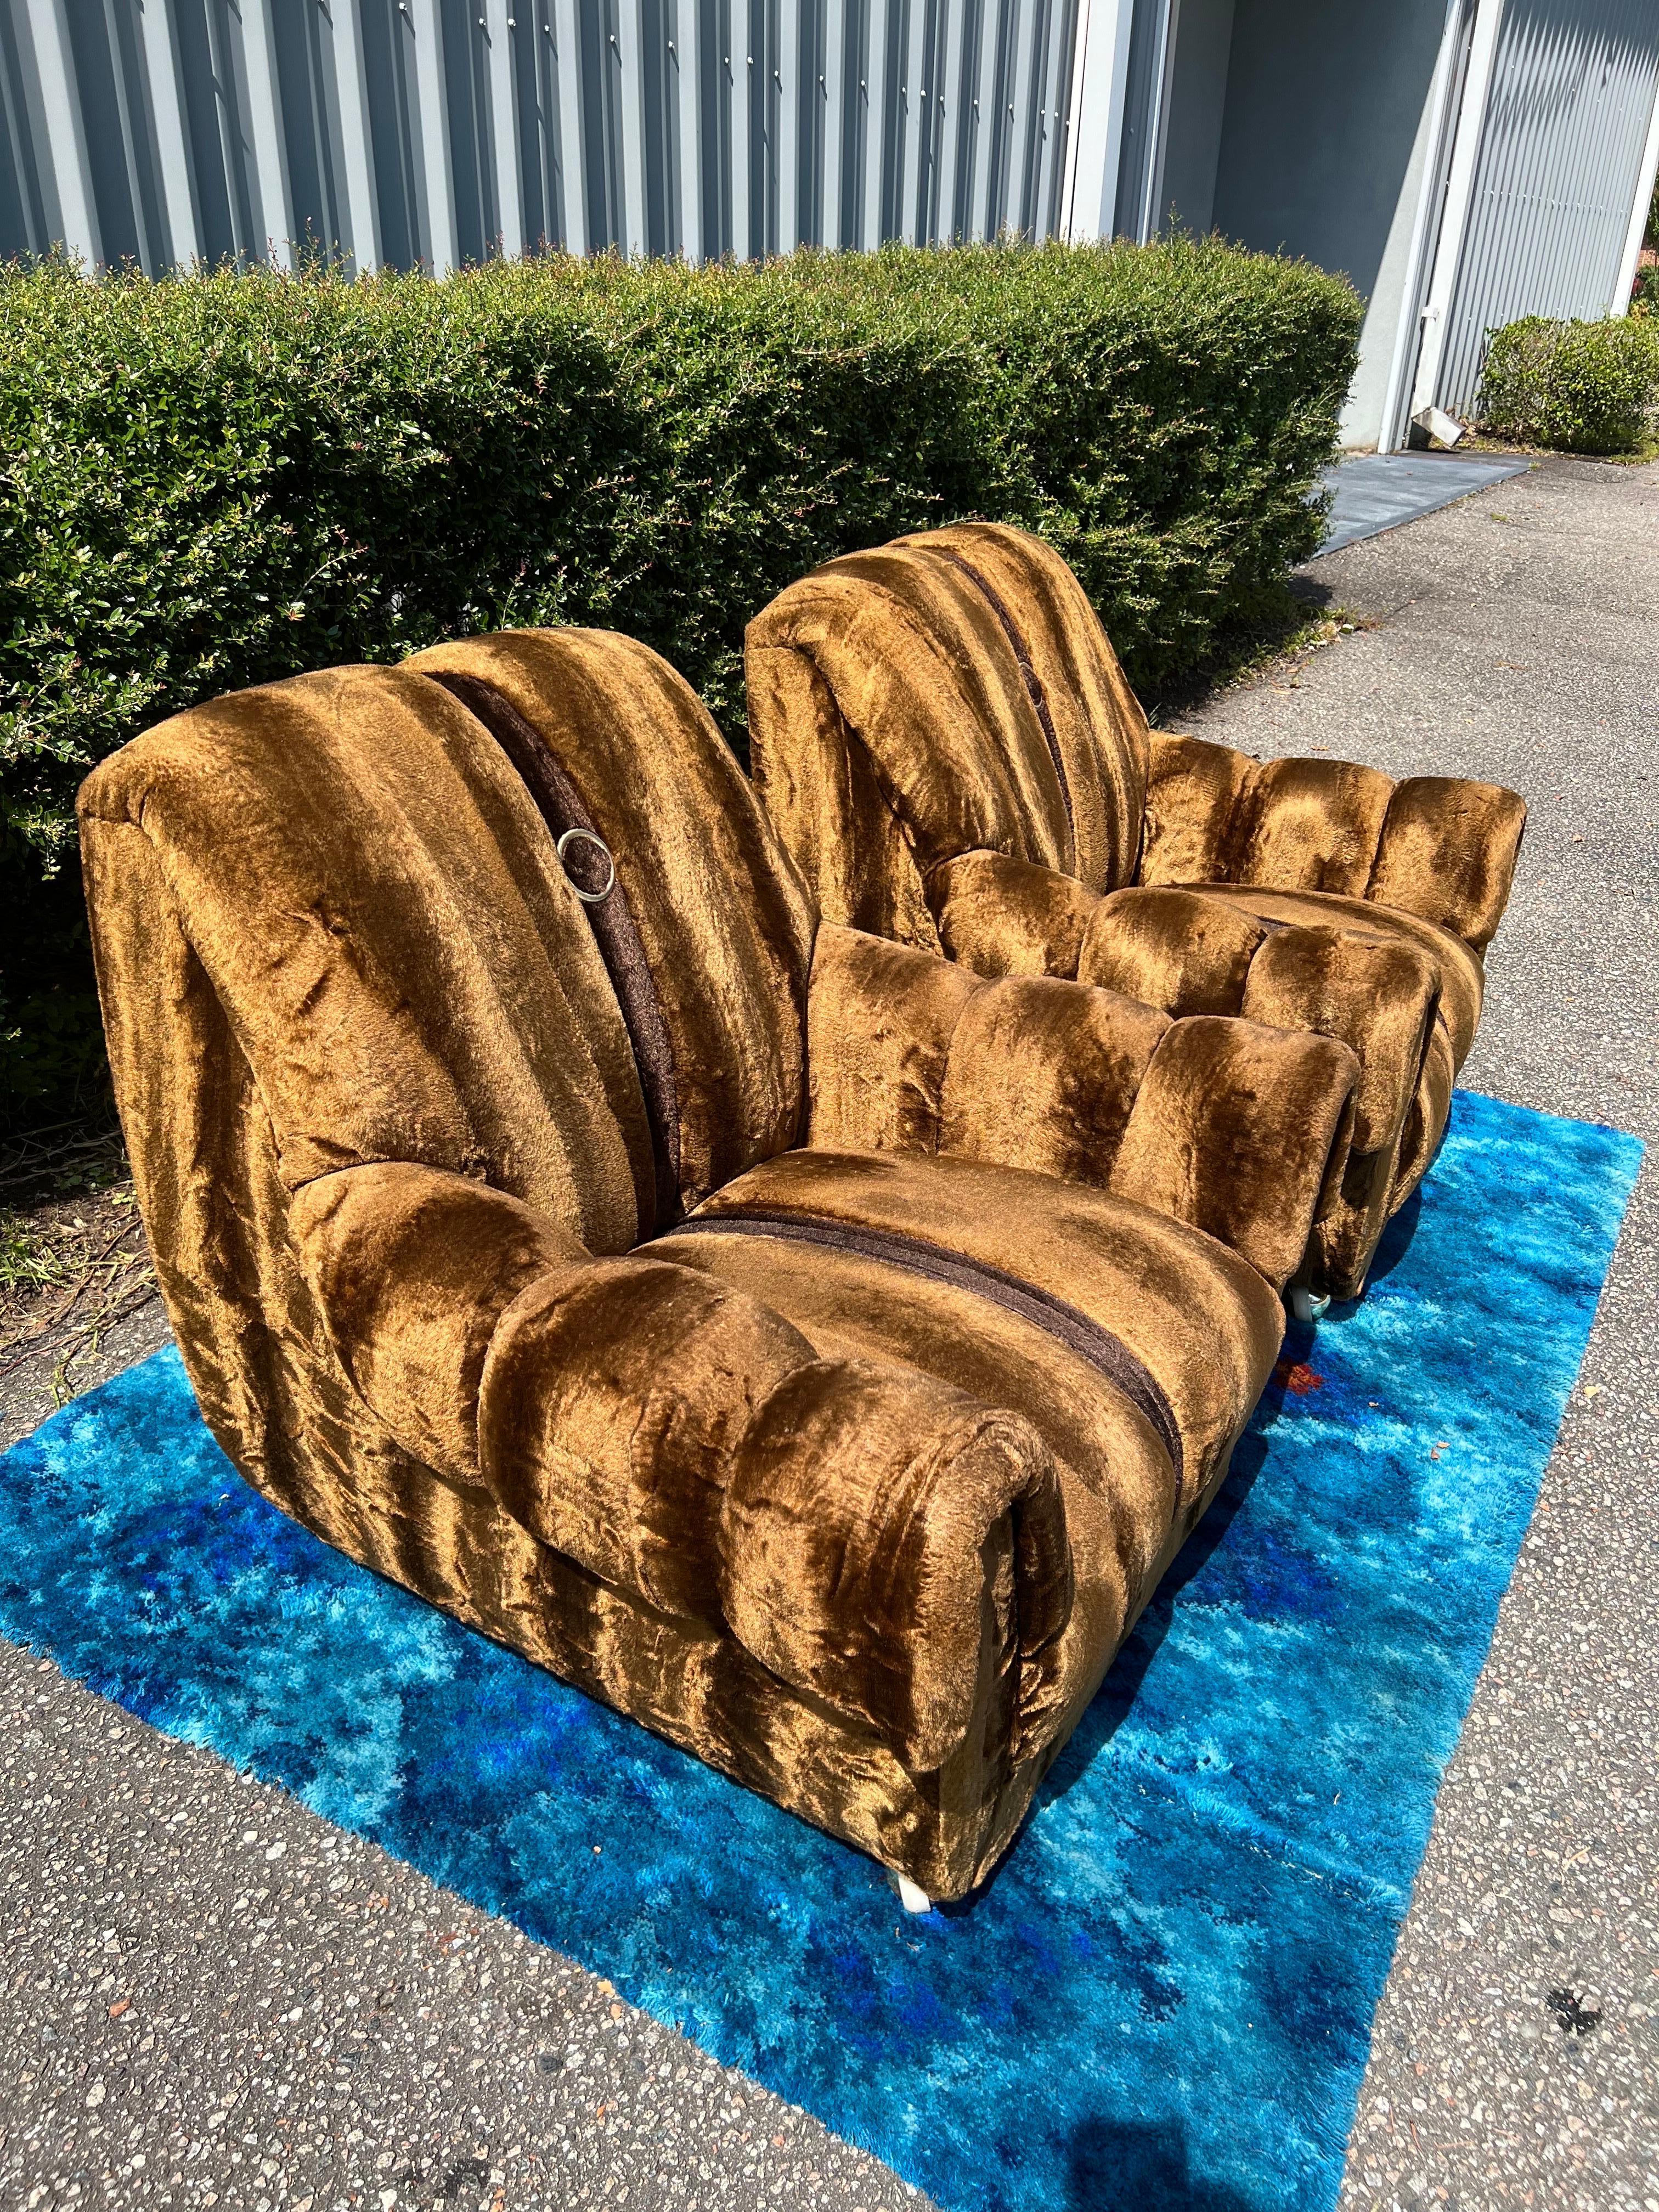 American 1970s Channeled Arm Chairs - a Pair For Sale